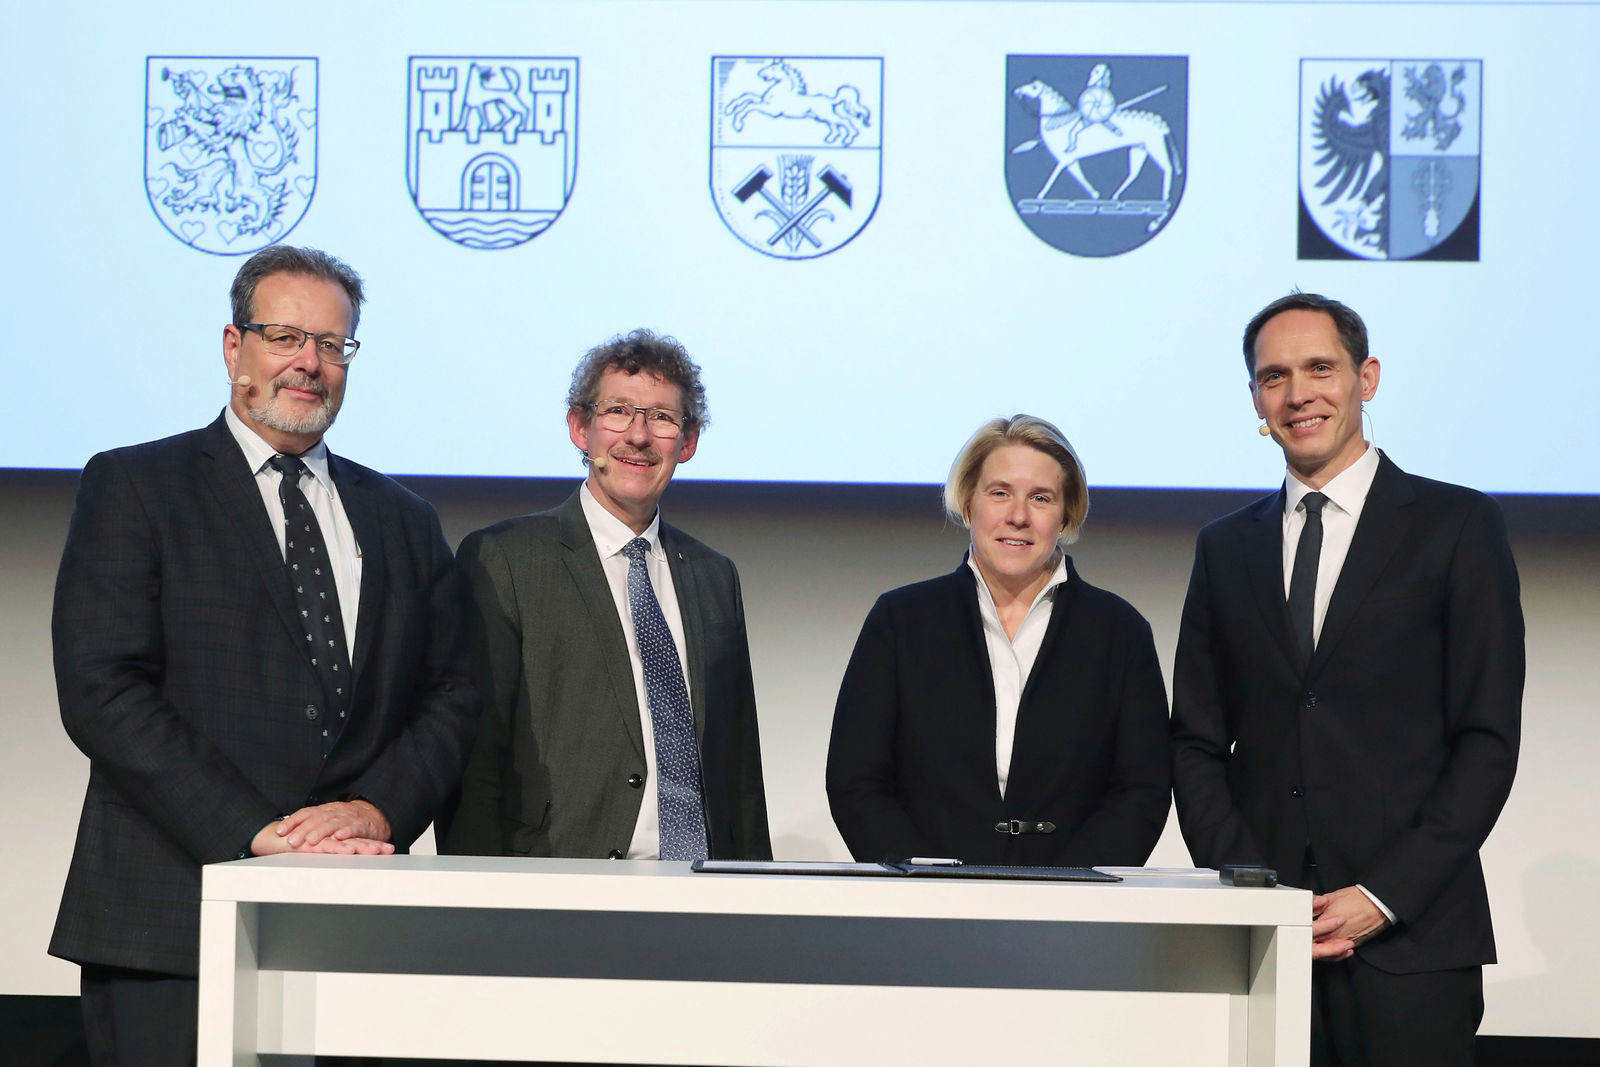 Joint development of Drömling - Volkswagen Group signs Letter of Intent with Lower Saxony and Saxony-Anhalt